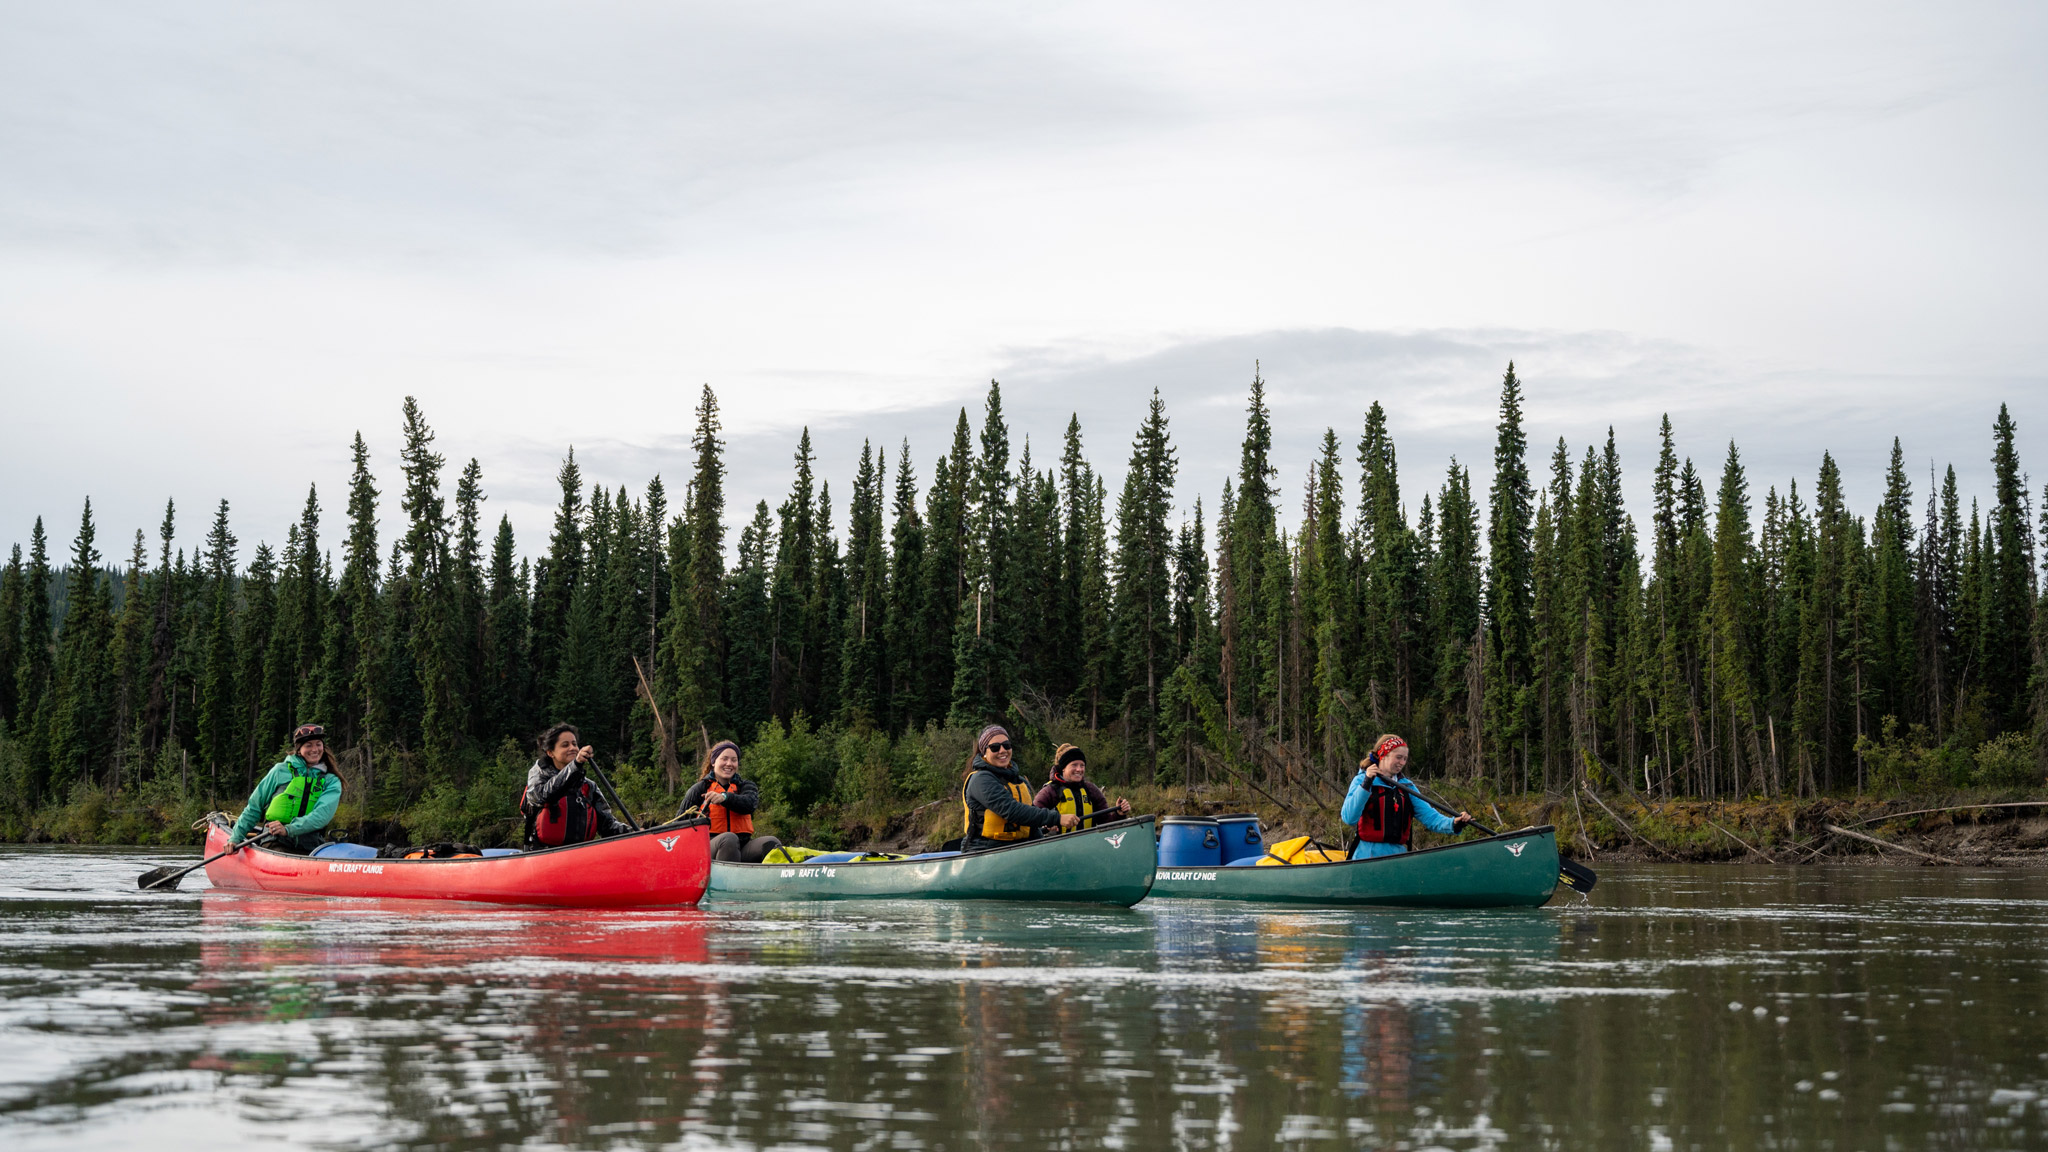 students canoeing with in a scenic cloudy forest landscape